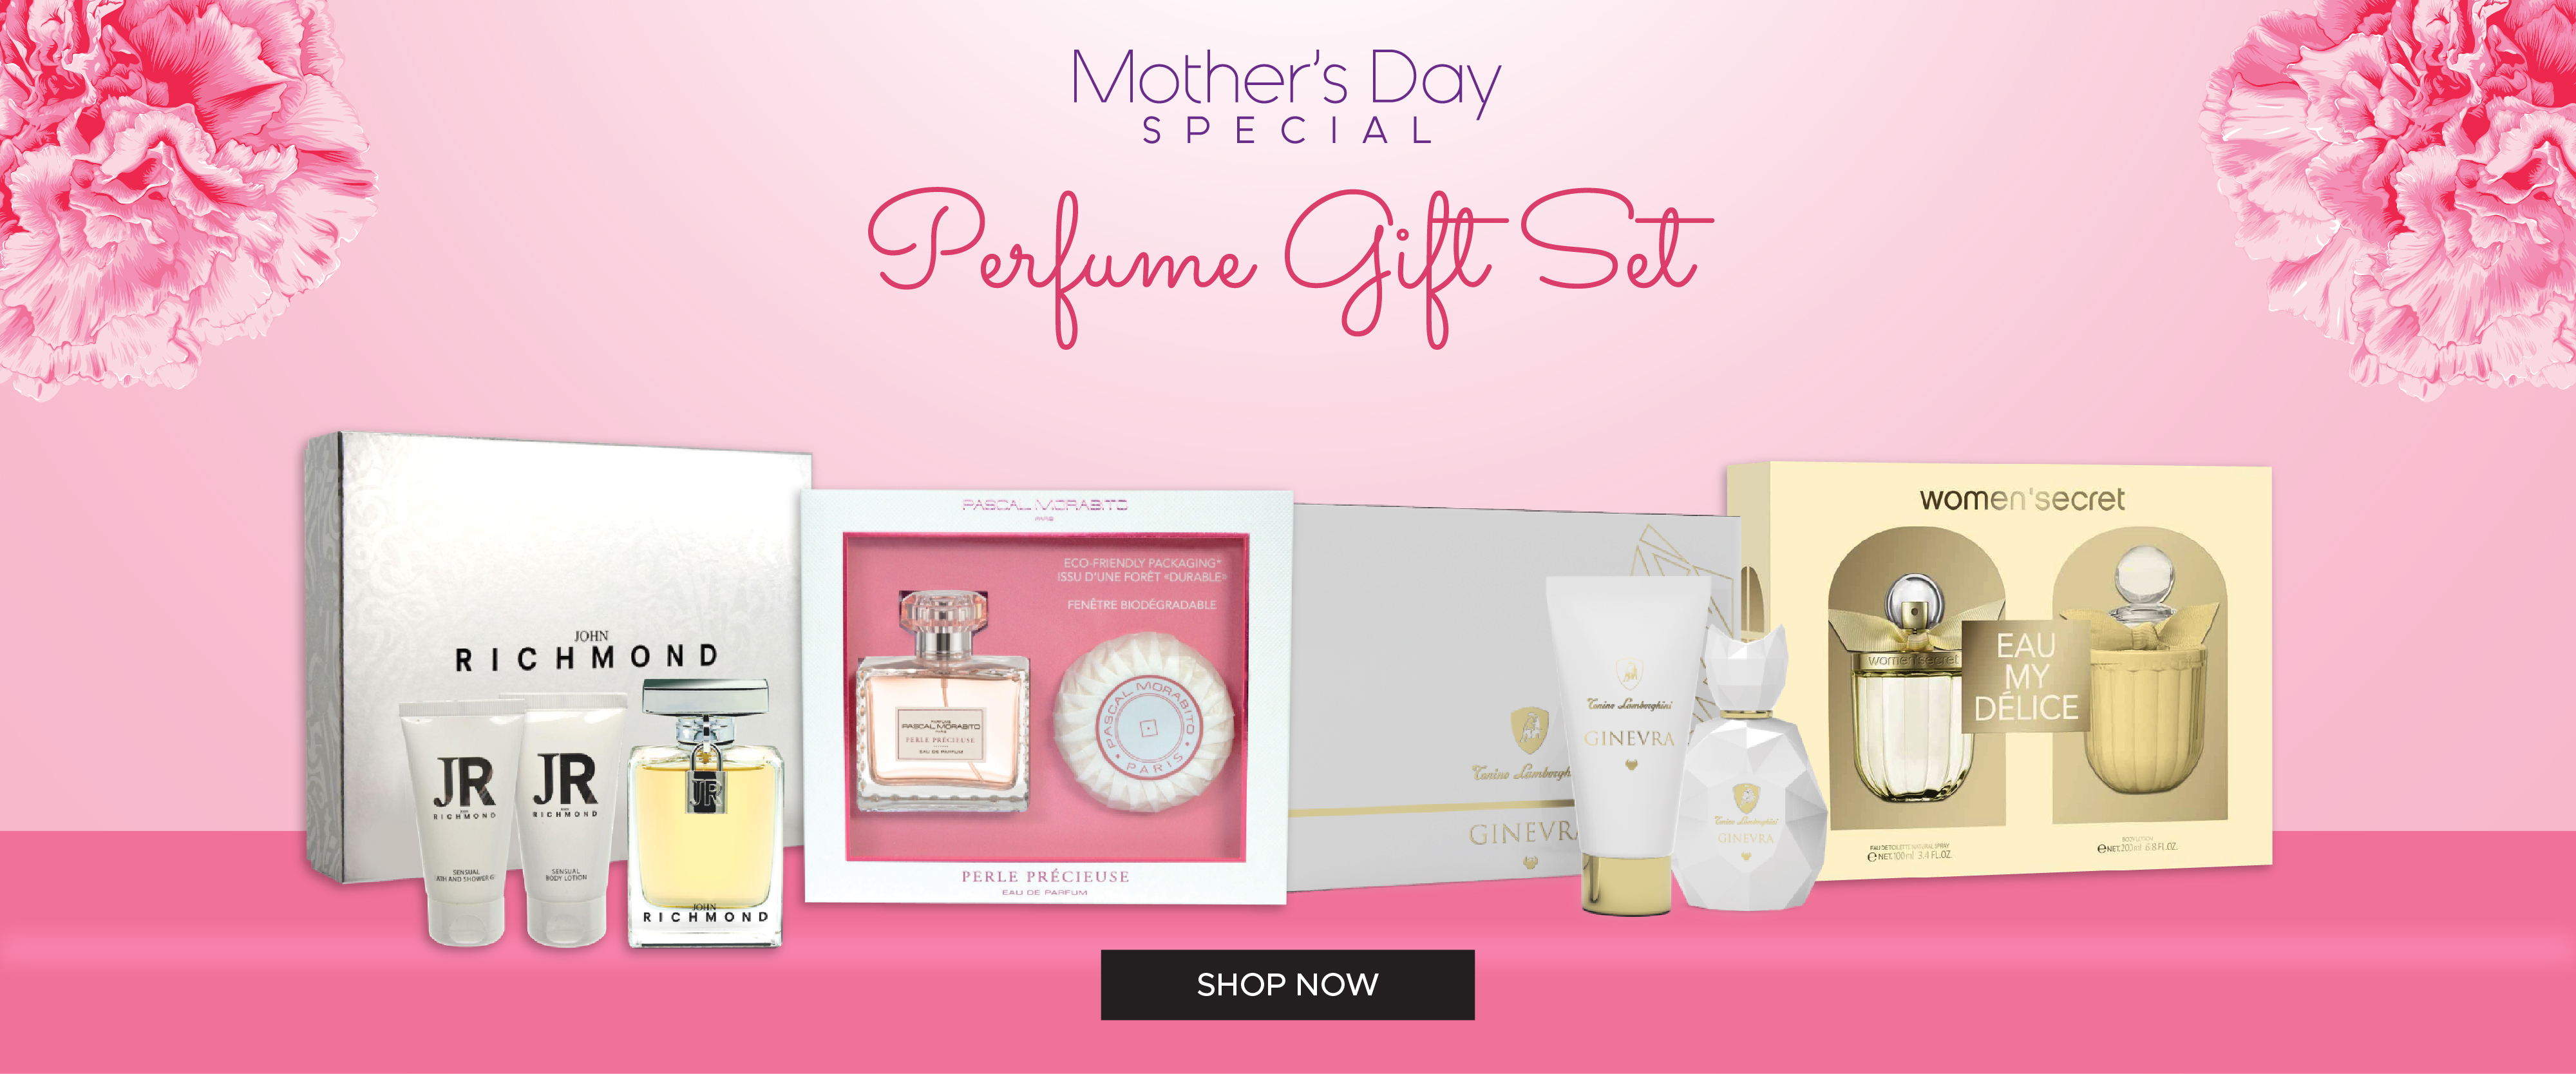 [Homepage] Mother's Day Perfume Gift Set